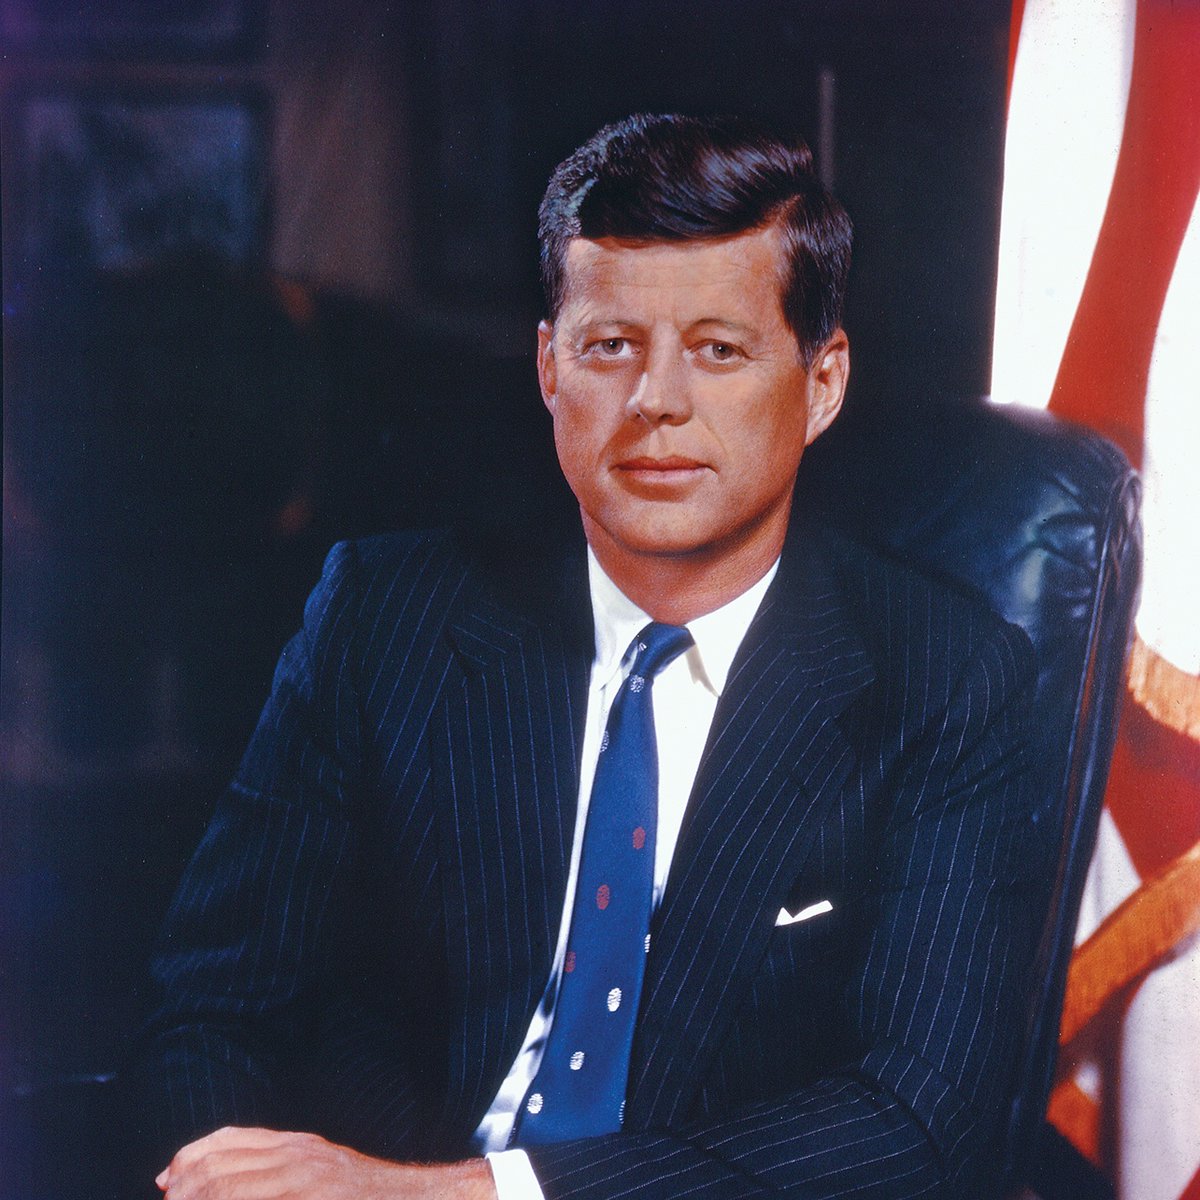 Every year, they tracked these men to see how their lives turned out, including psychological and physical evaluations.One became president of the United States. John F. Kennedy.Others became bankers, lawyers, and doctors.